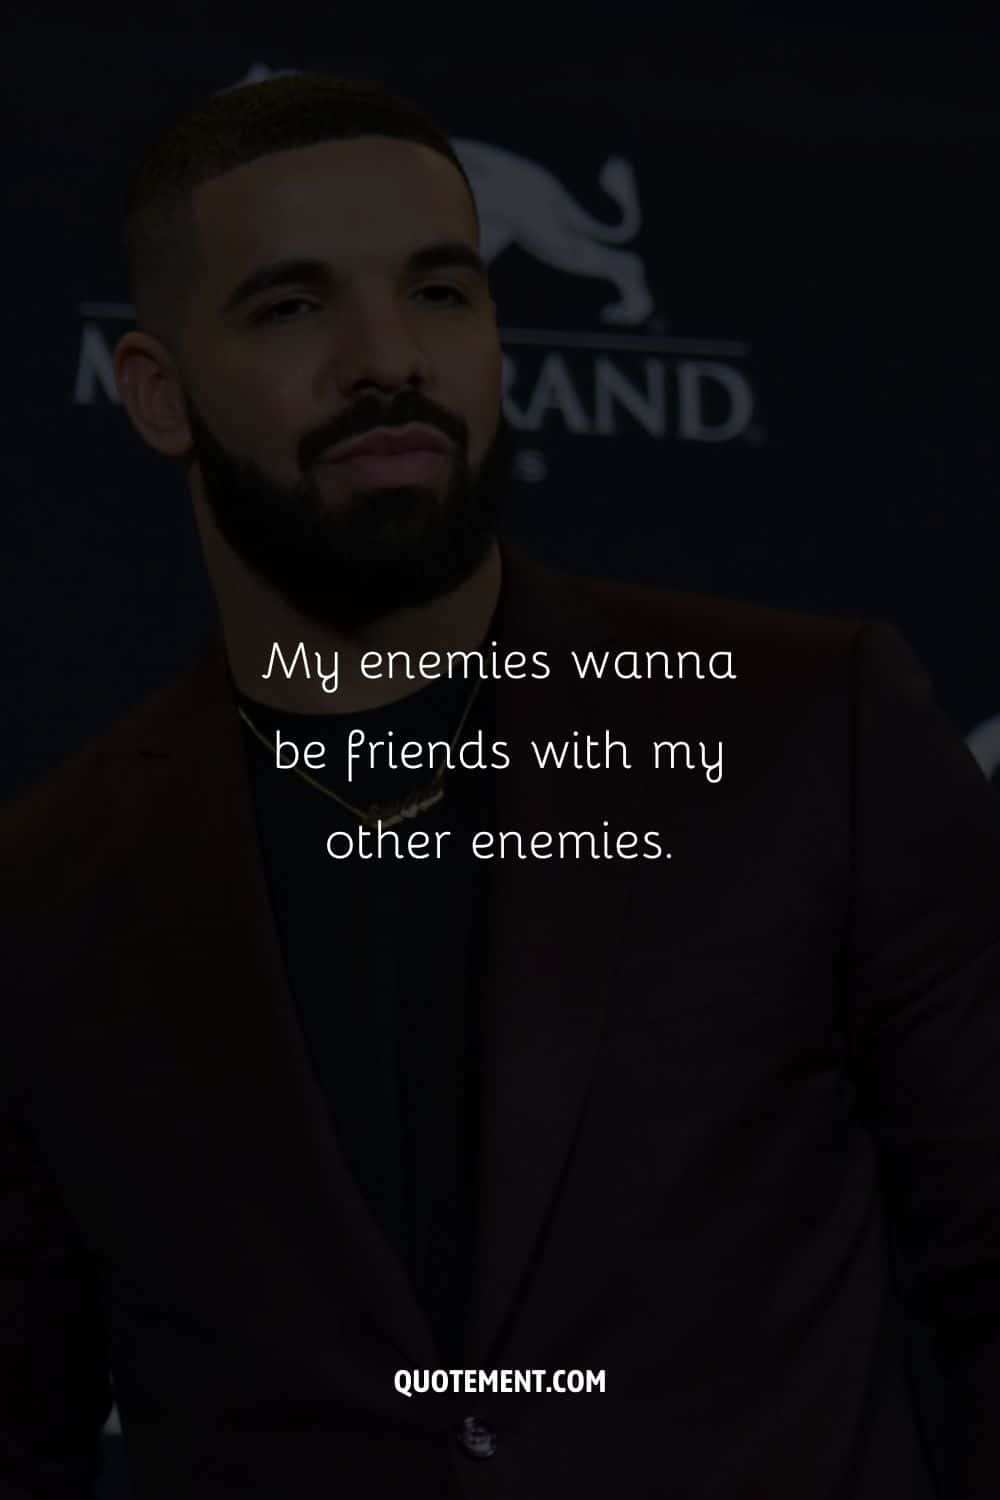 My enemies wanna be friends with my other enemies.